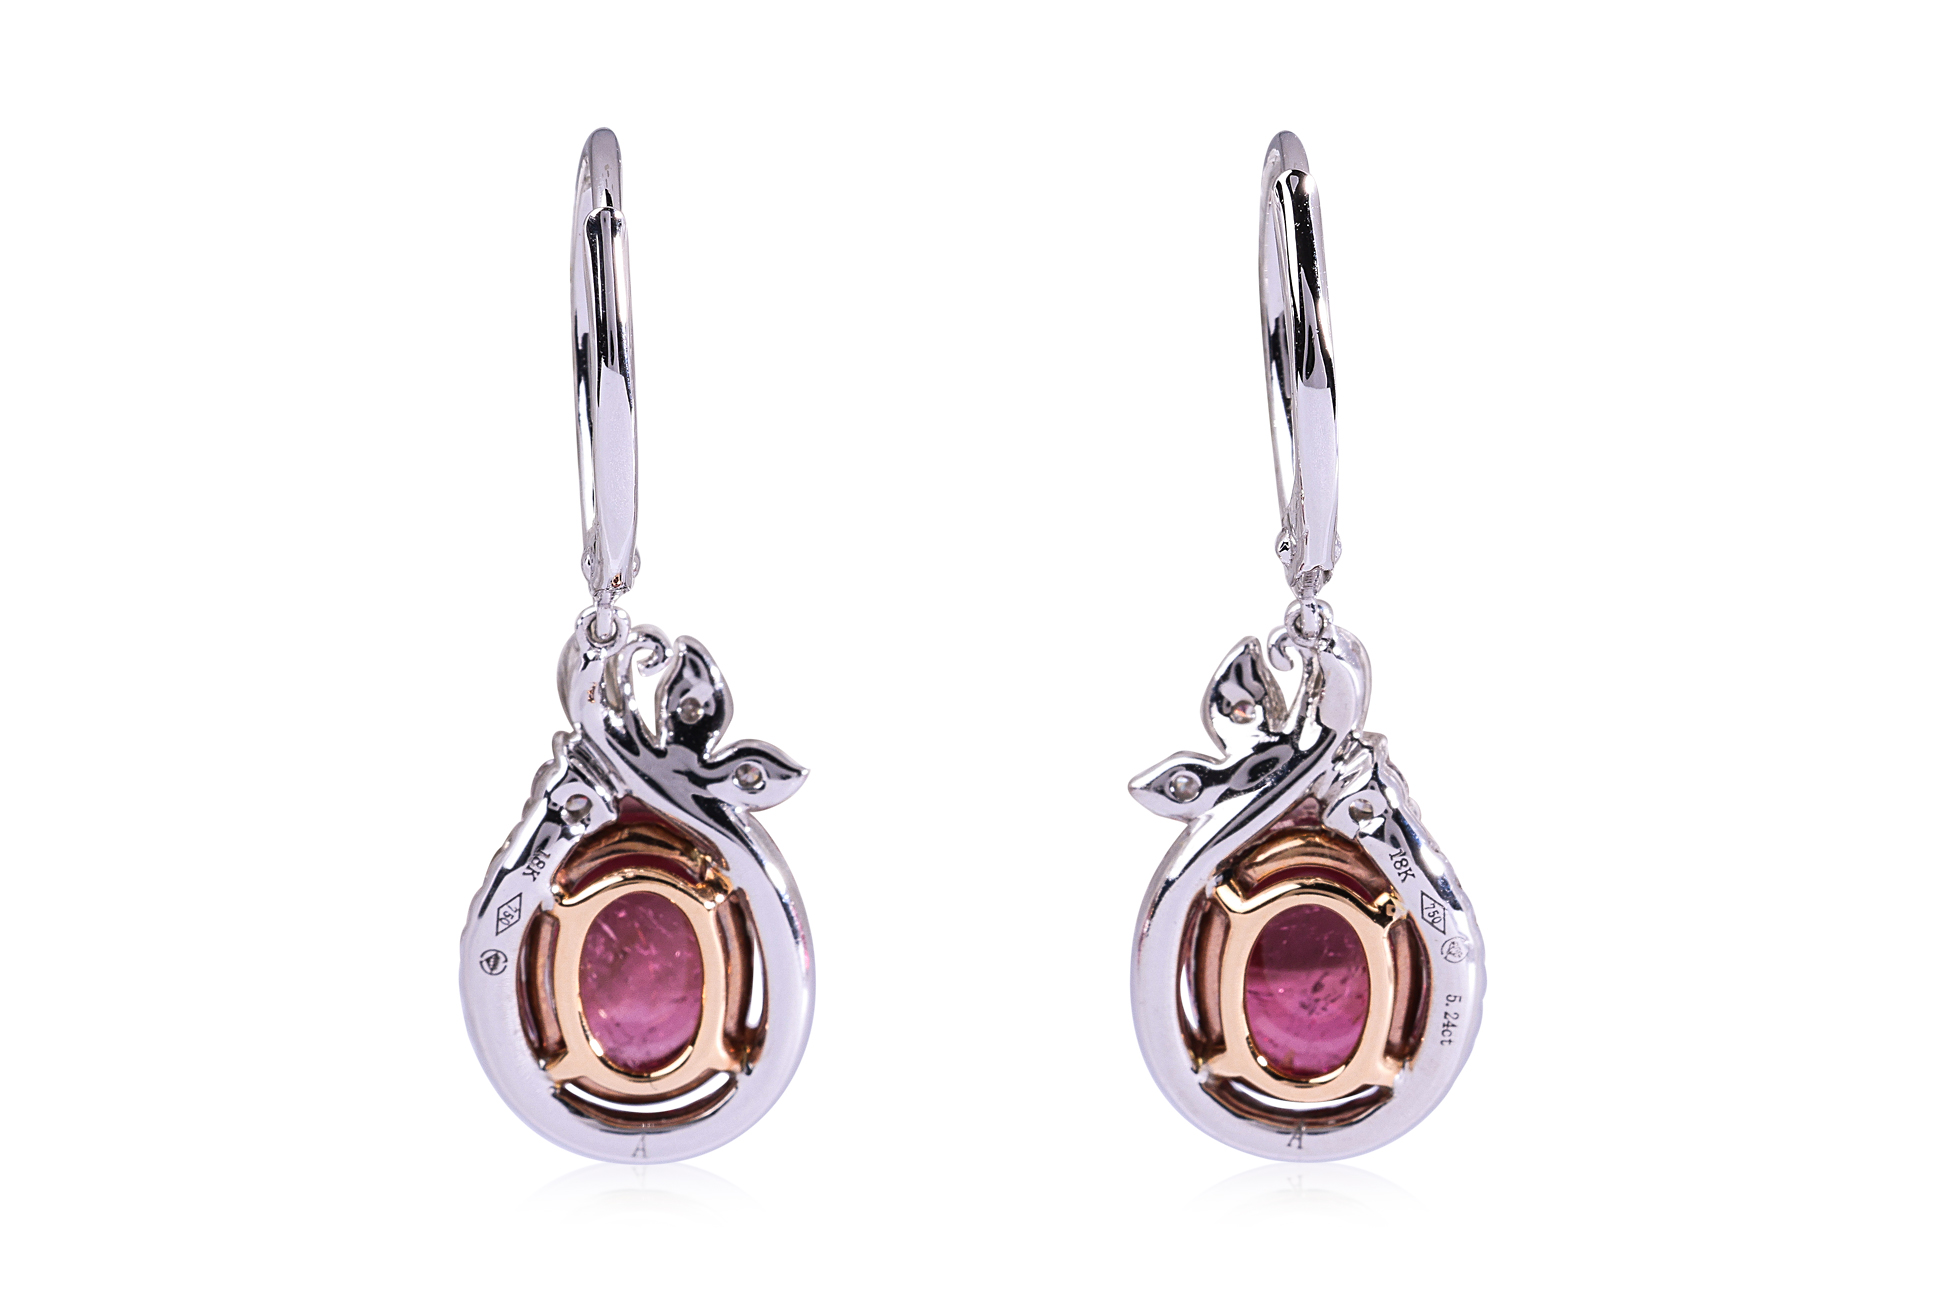 A PAIR OF PINK TOURMALINE AND DIAMOND EARRINGS - Image 3 of 4